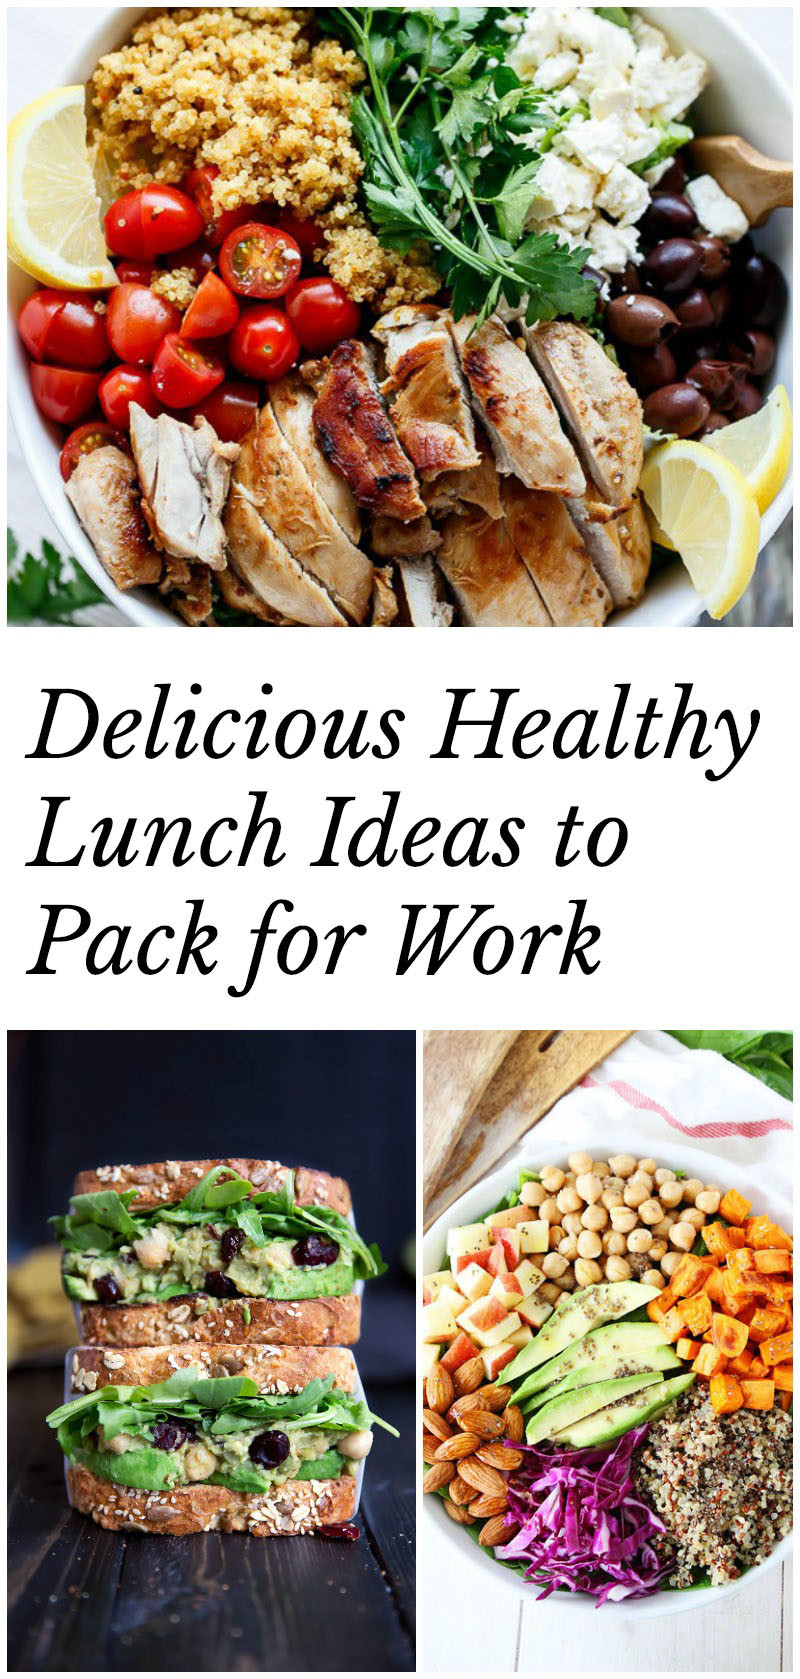 Easy Healthy Lunches For Work
 Healthy Lunch Ideas to Pack for Work 40 recipes